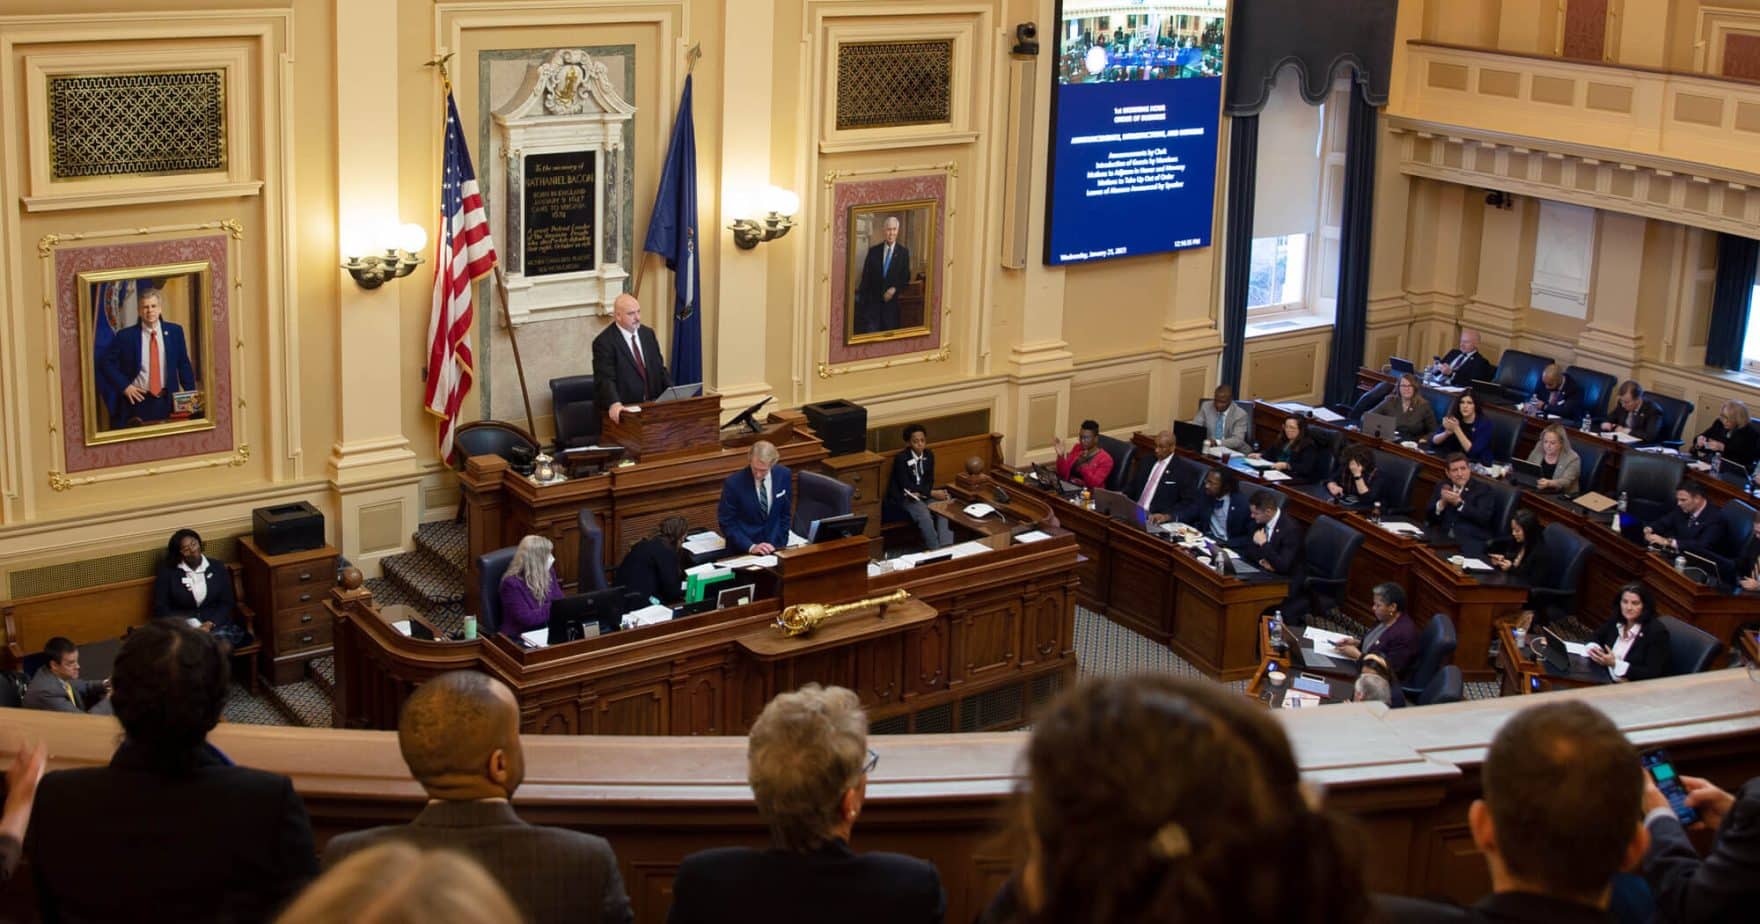 Virginia General Assembly Honors Regent University in Commending Resolution